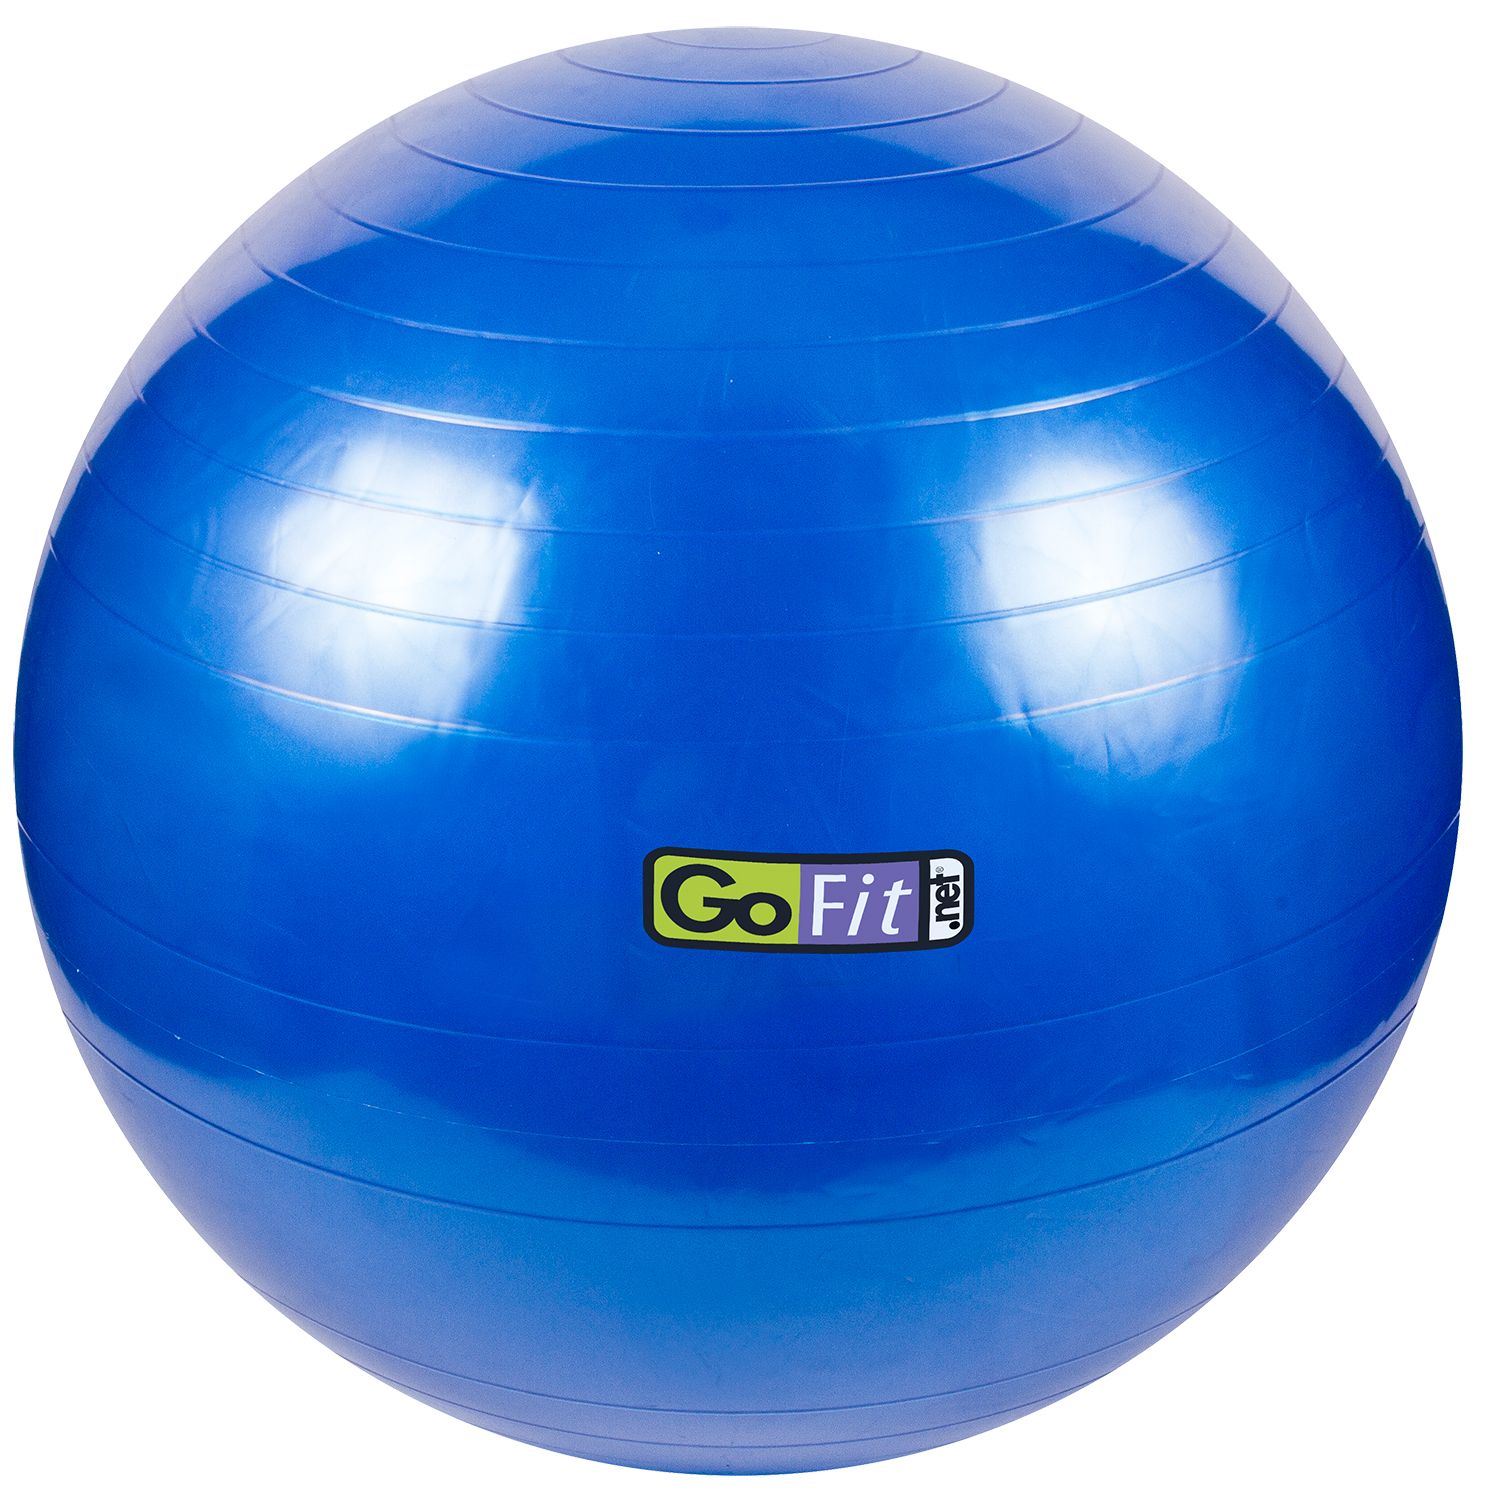 GoFit 75 cm Stability Ball | DICK'S Sporting Goods